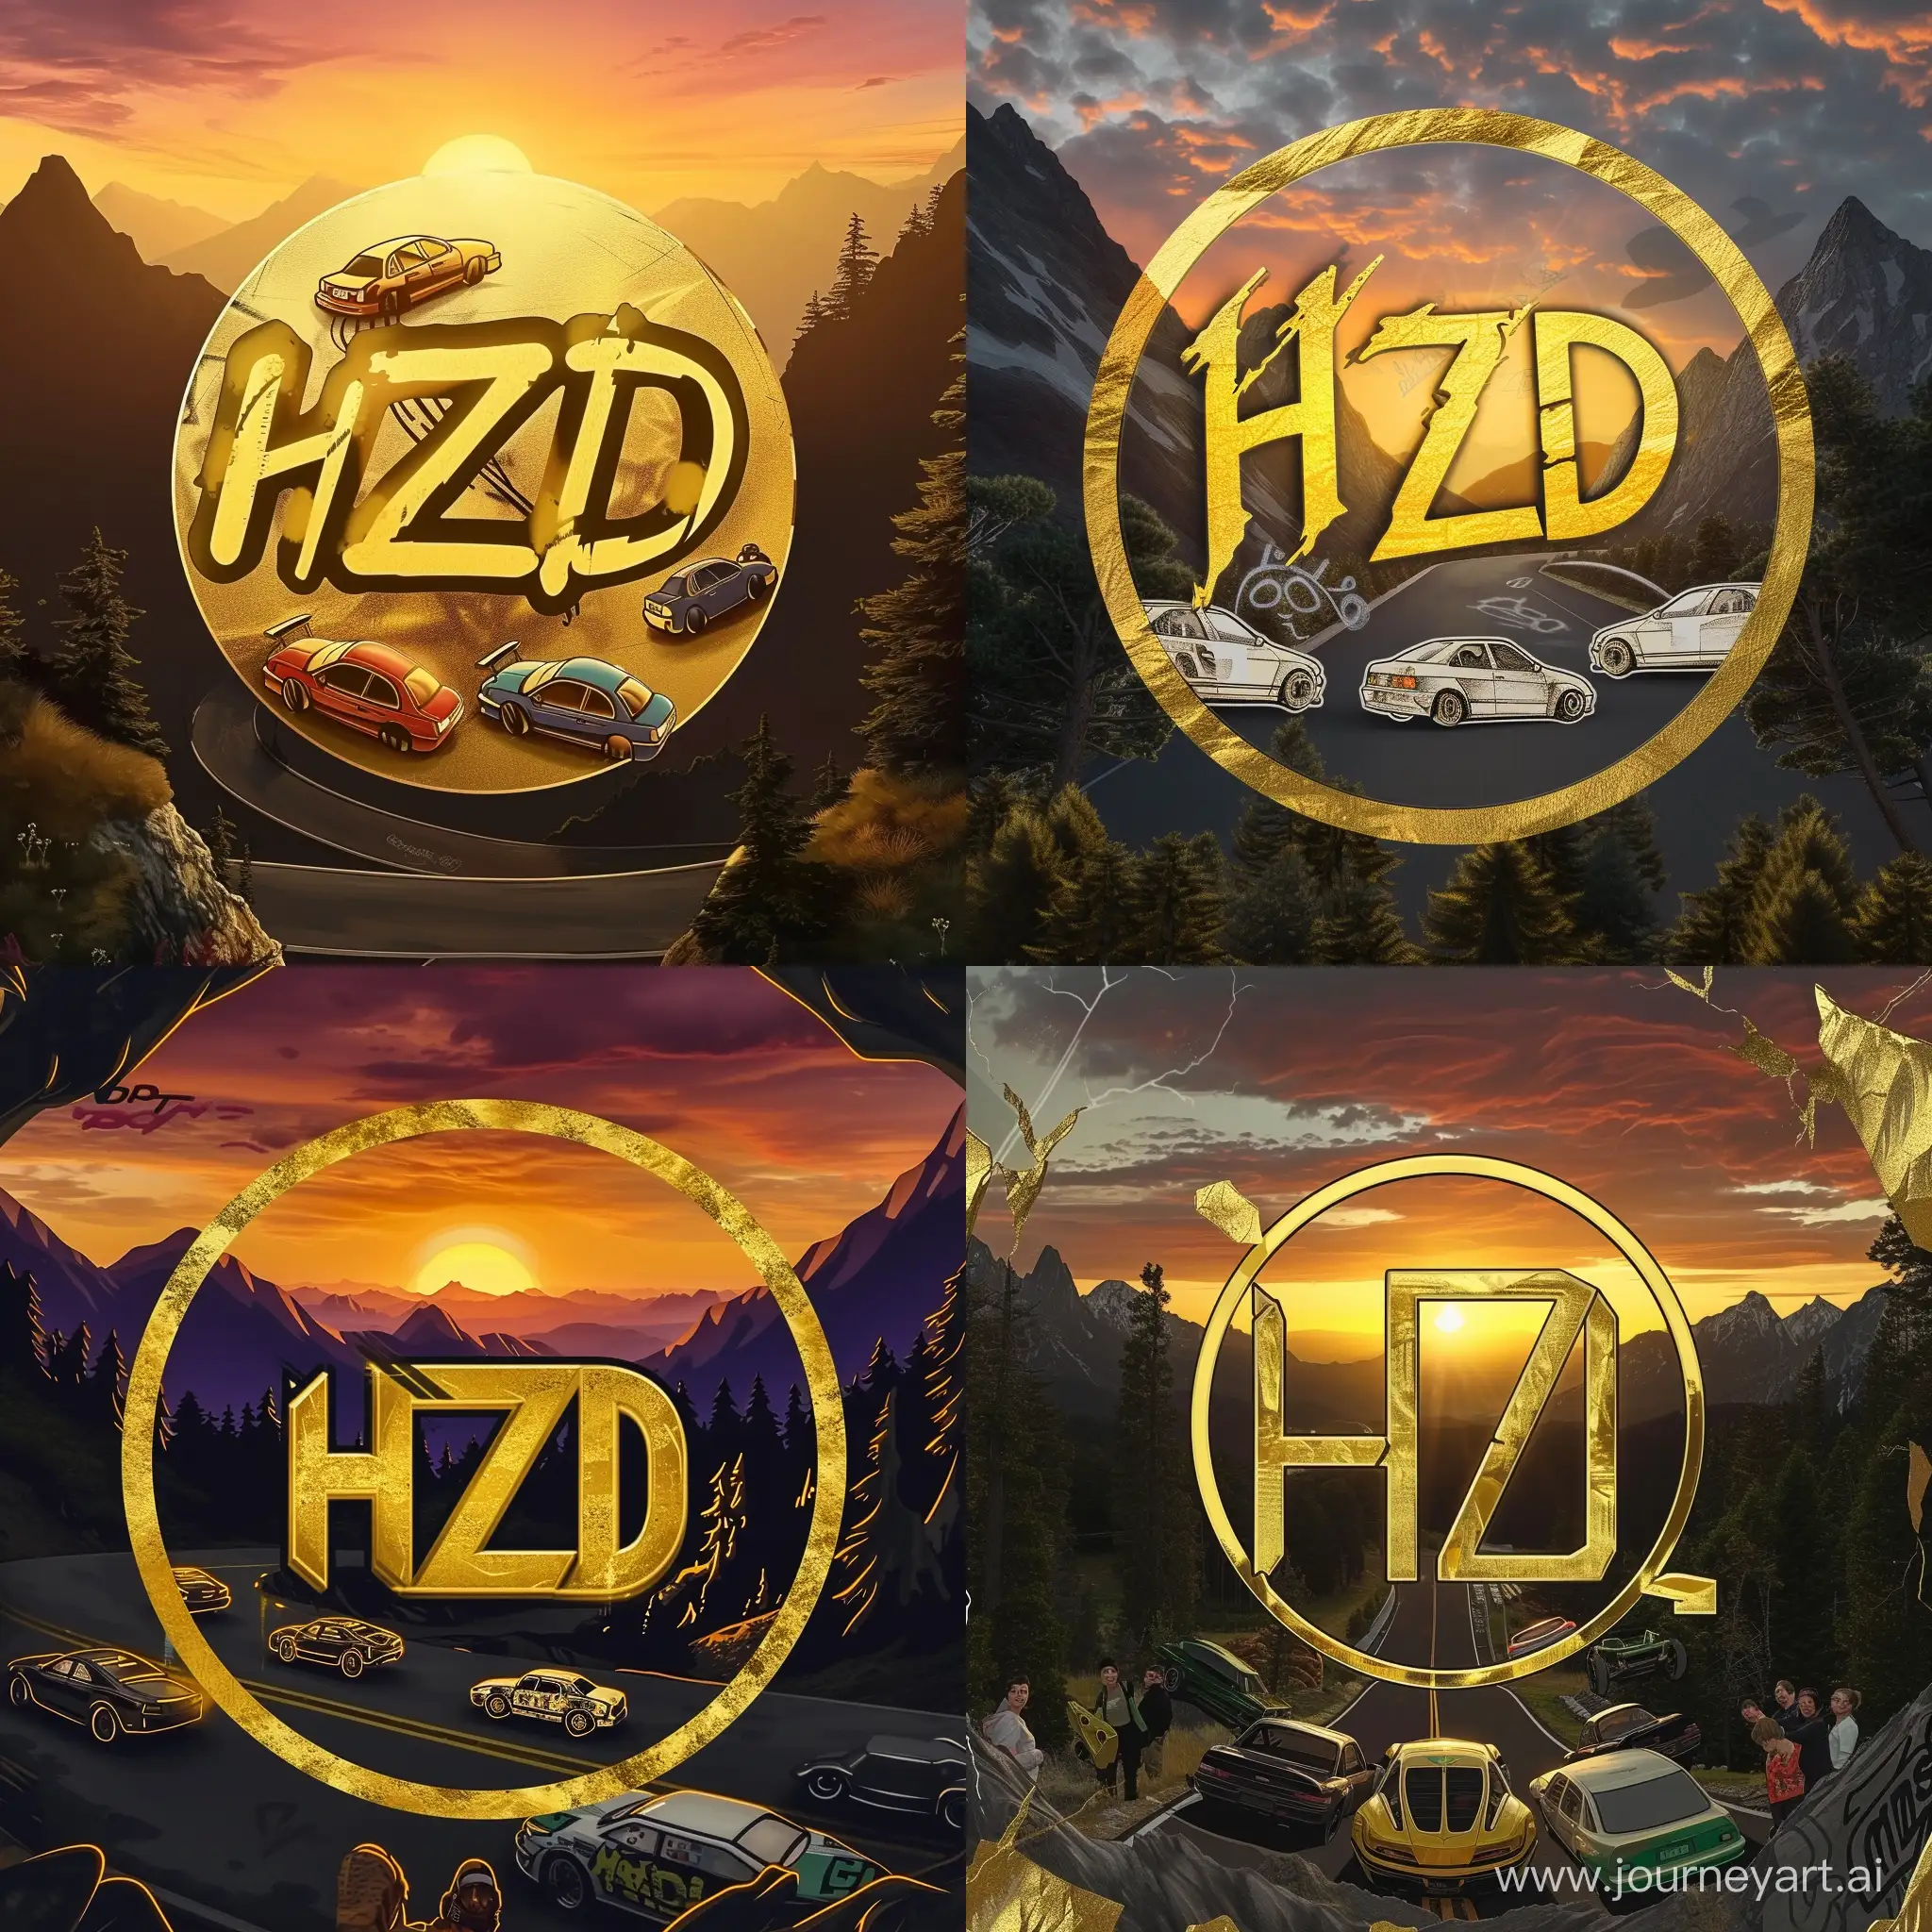 Childs-Golden-Sunset-Downhill-Race-Logo-with-Racing-Cars-and-HZD-Tag